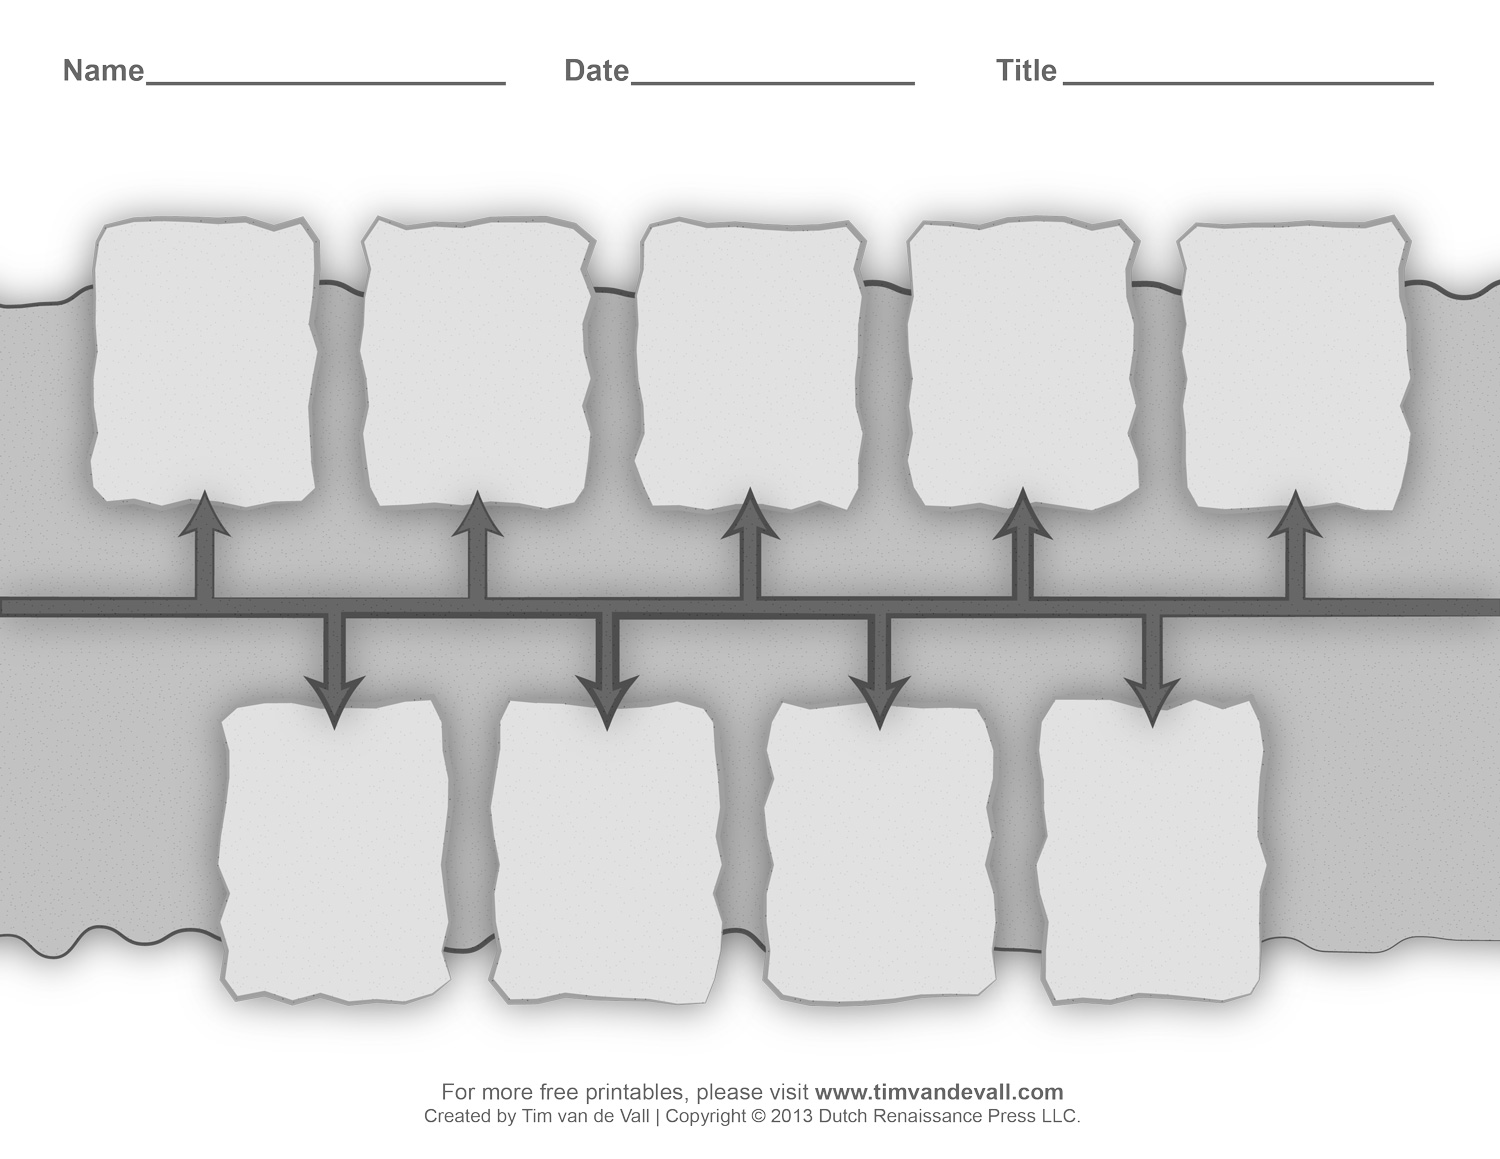 8-best-images-of-printable-blank-timelines-for-students-free-printable-blank-timeline-blank